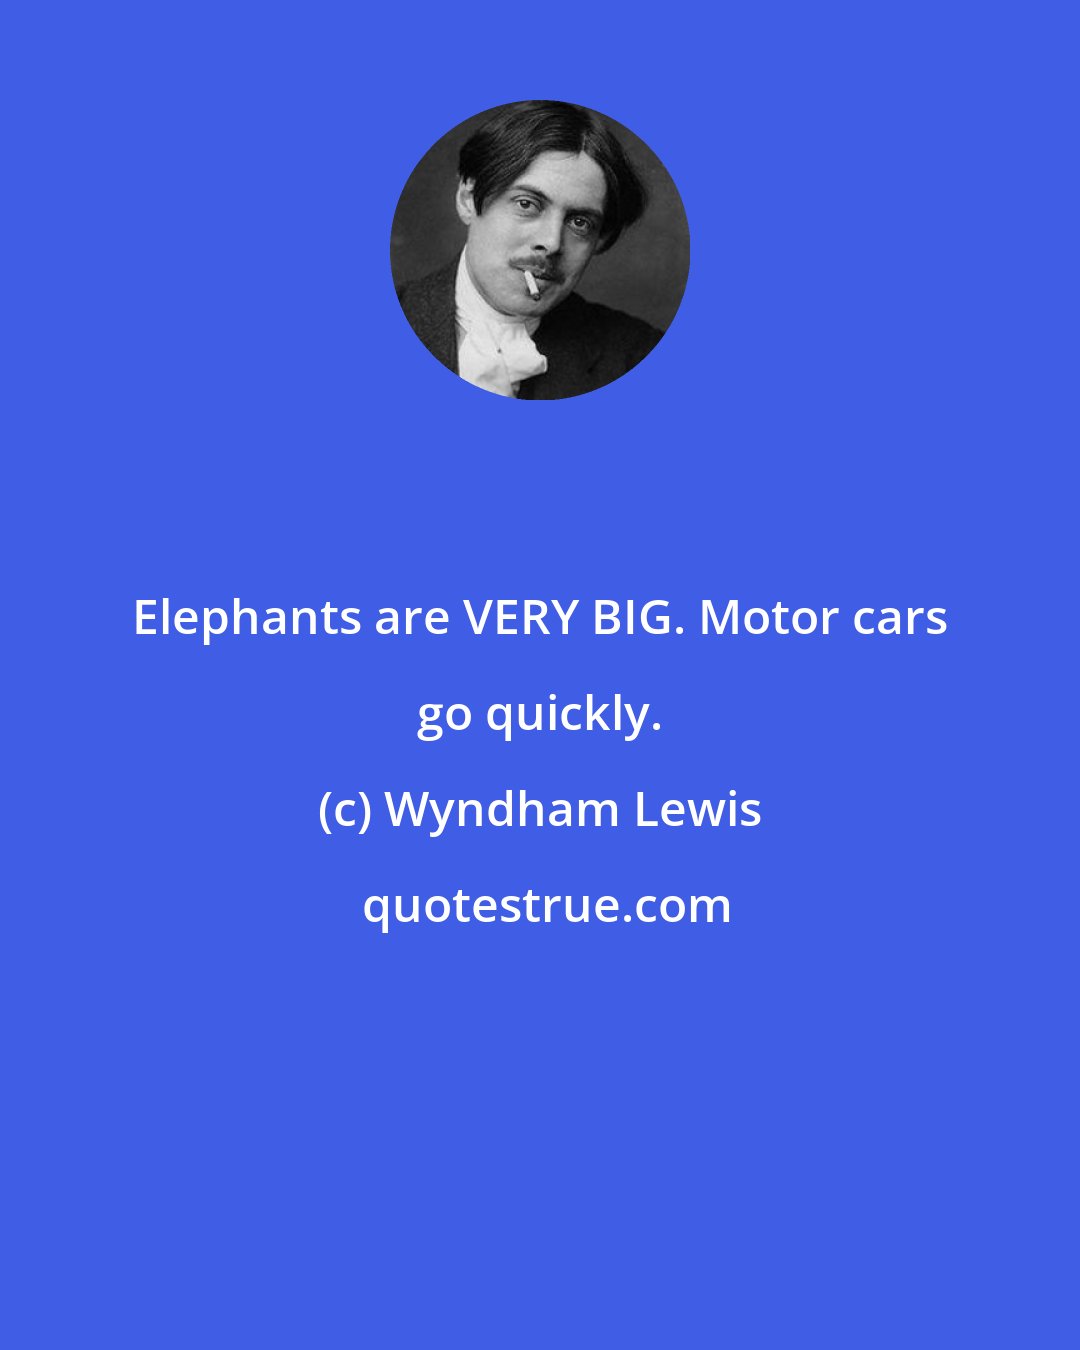 Wyndham Lewis: Elephants are VERY BIG. Motor cars go quickly.